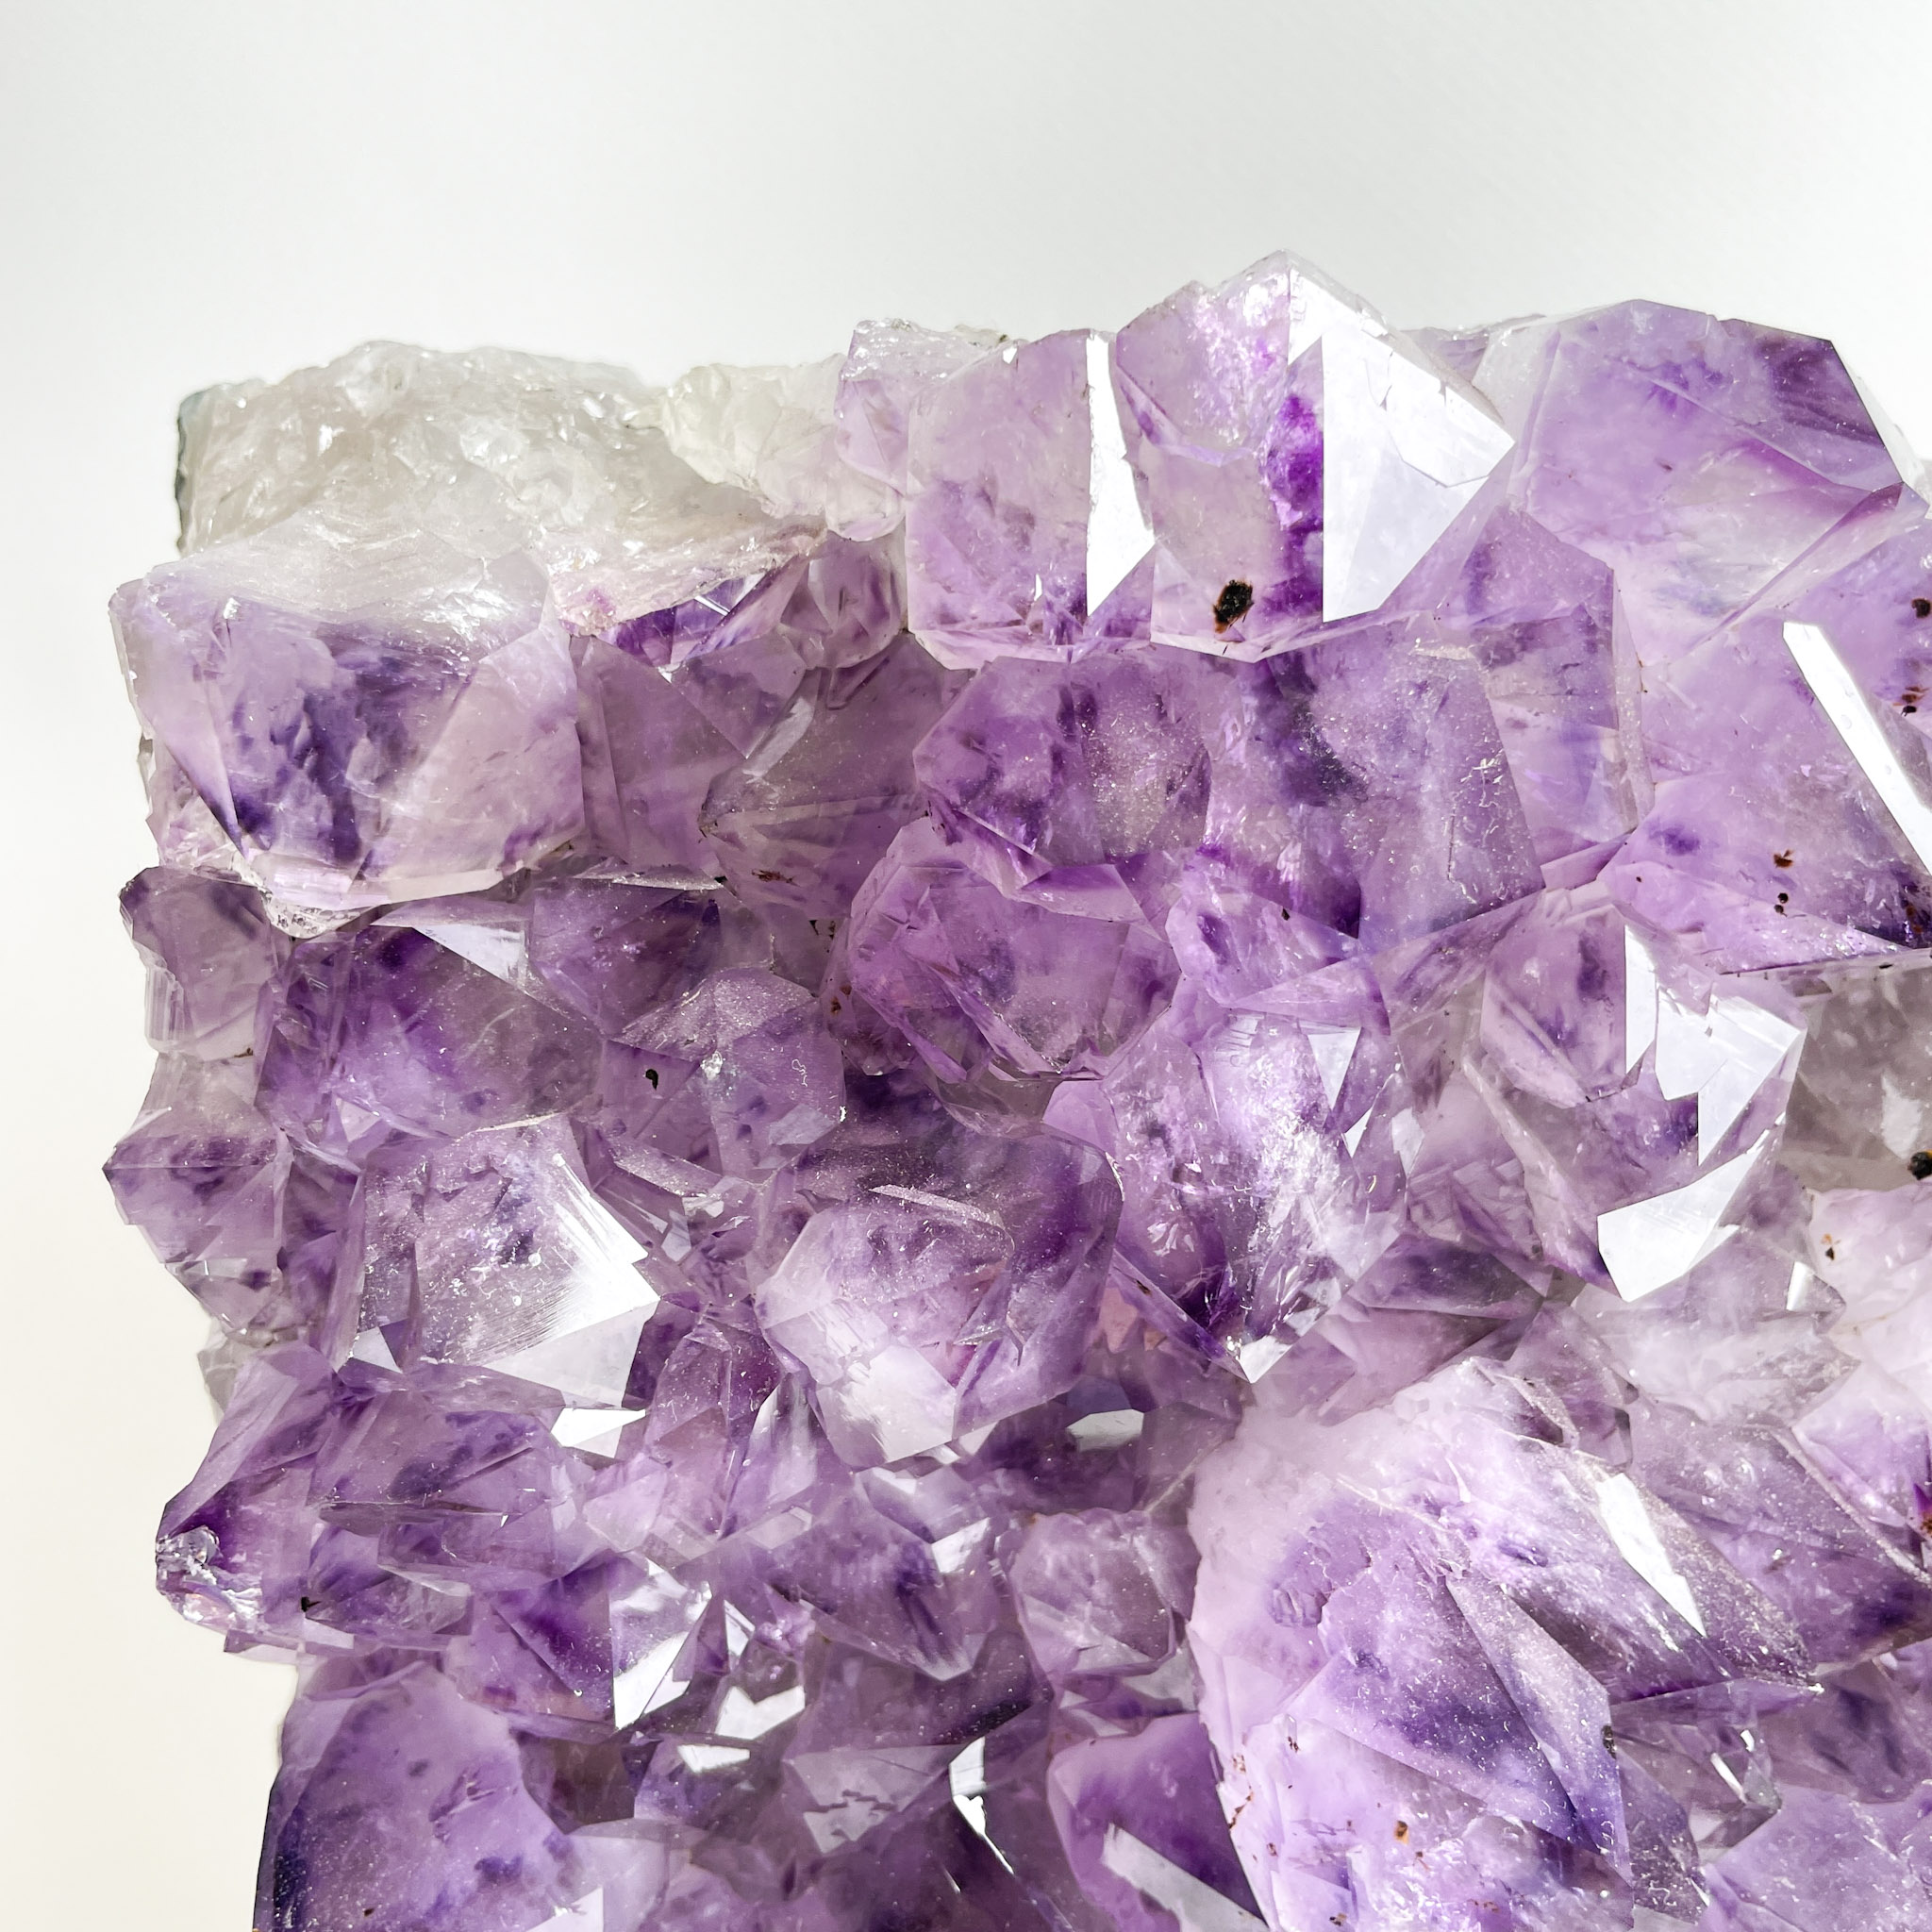 A close-up of a cluster of purple amethyst crystals with varying translucency and crystal sizes, set against a neutral background.